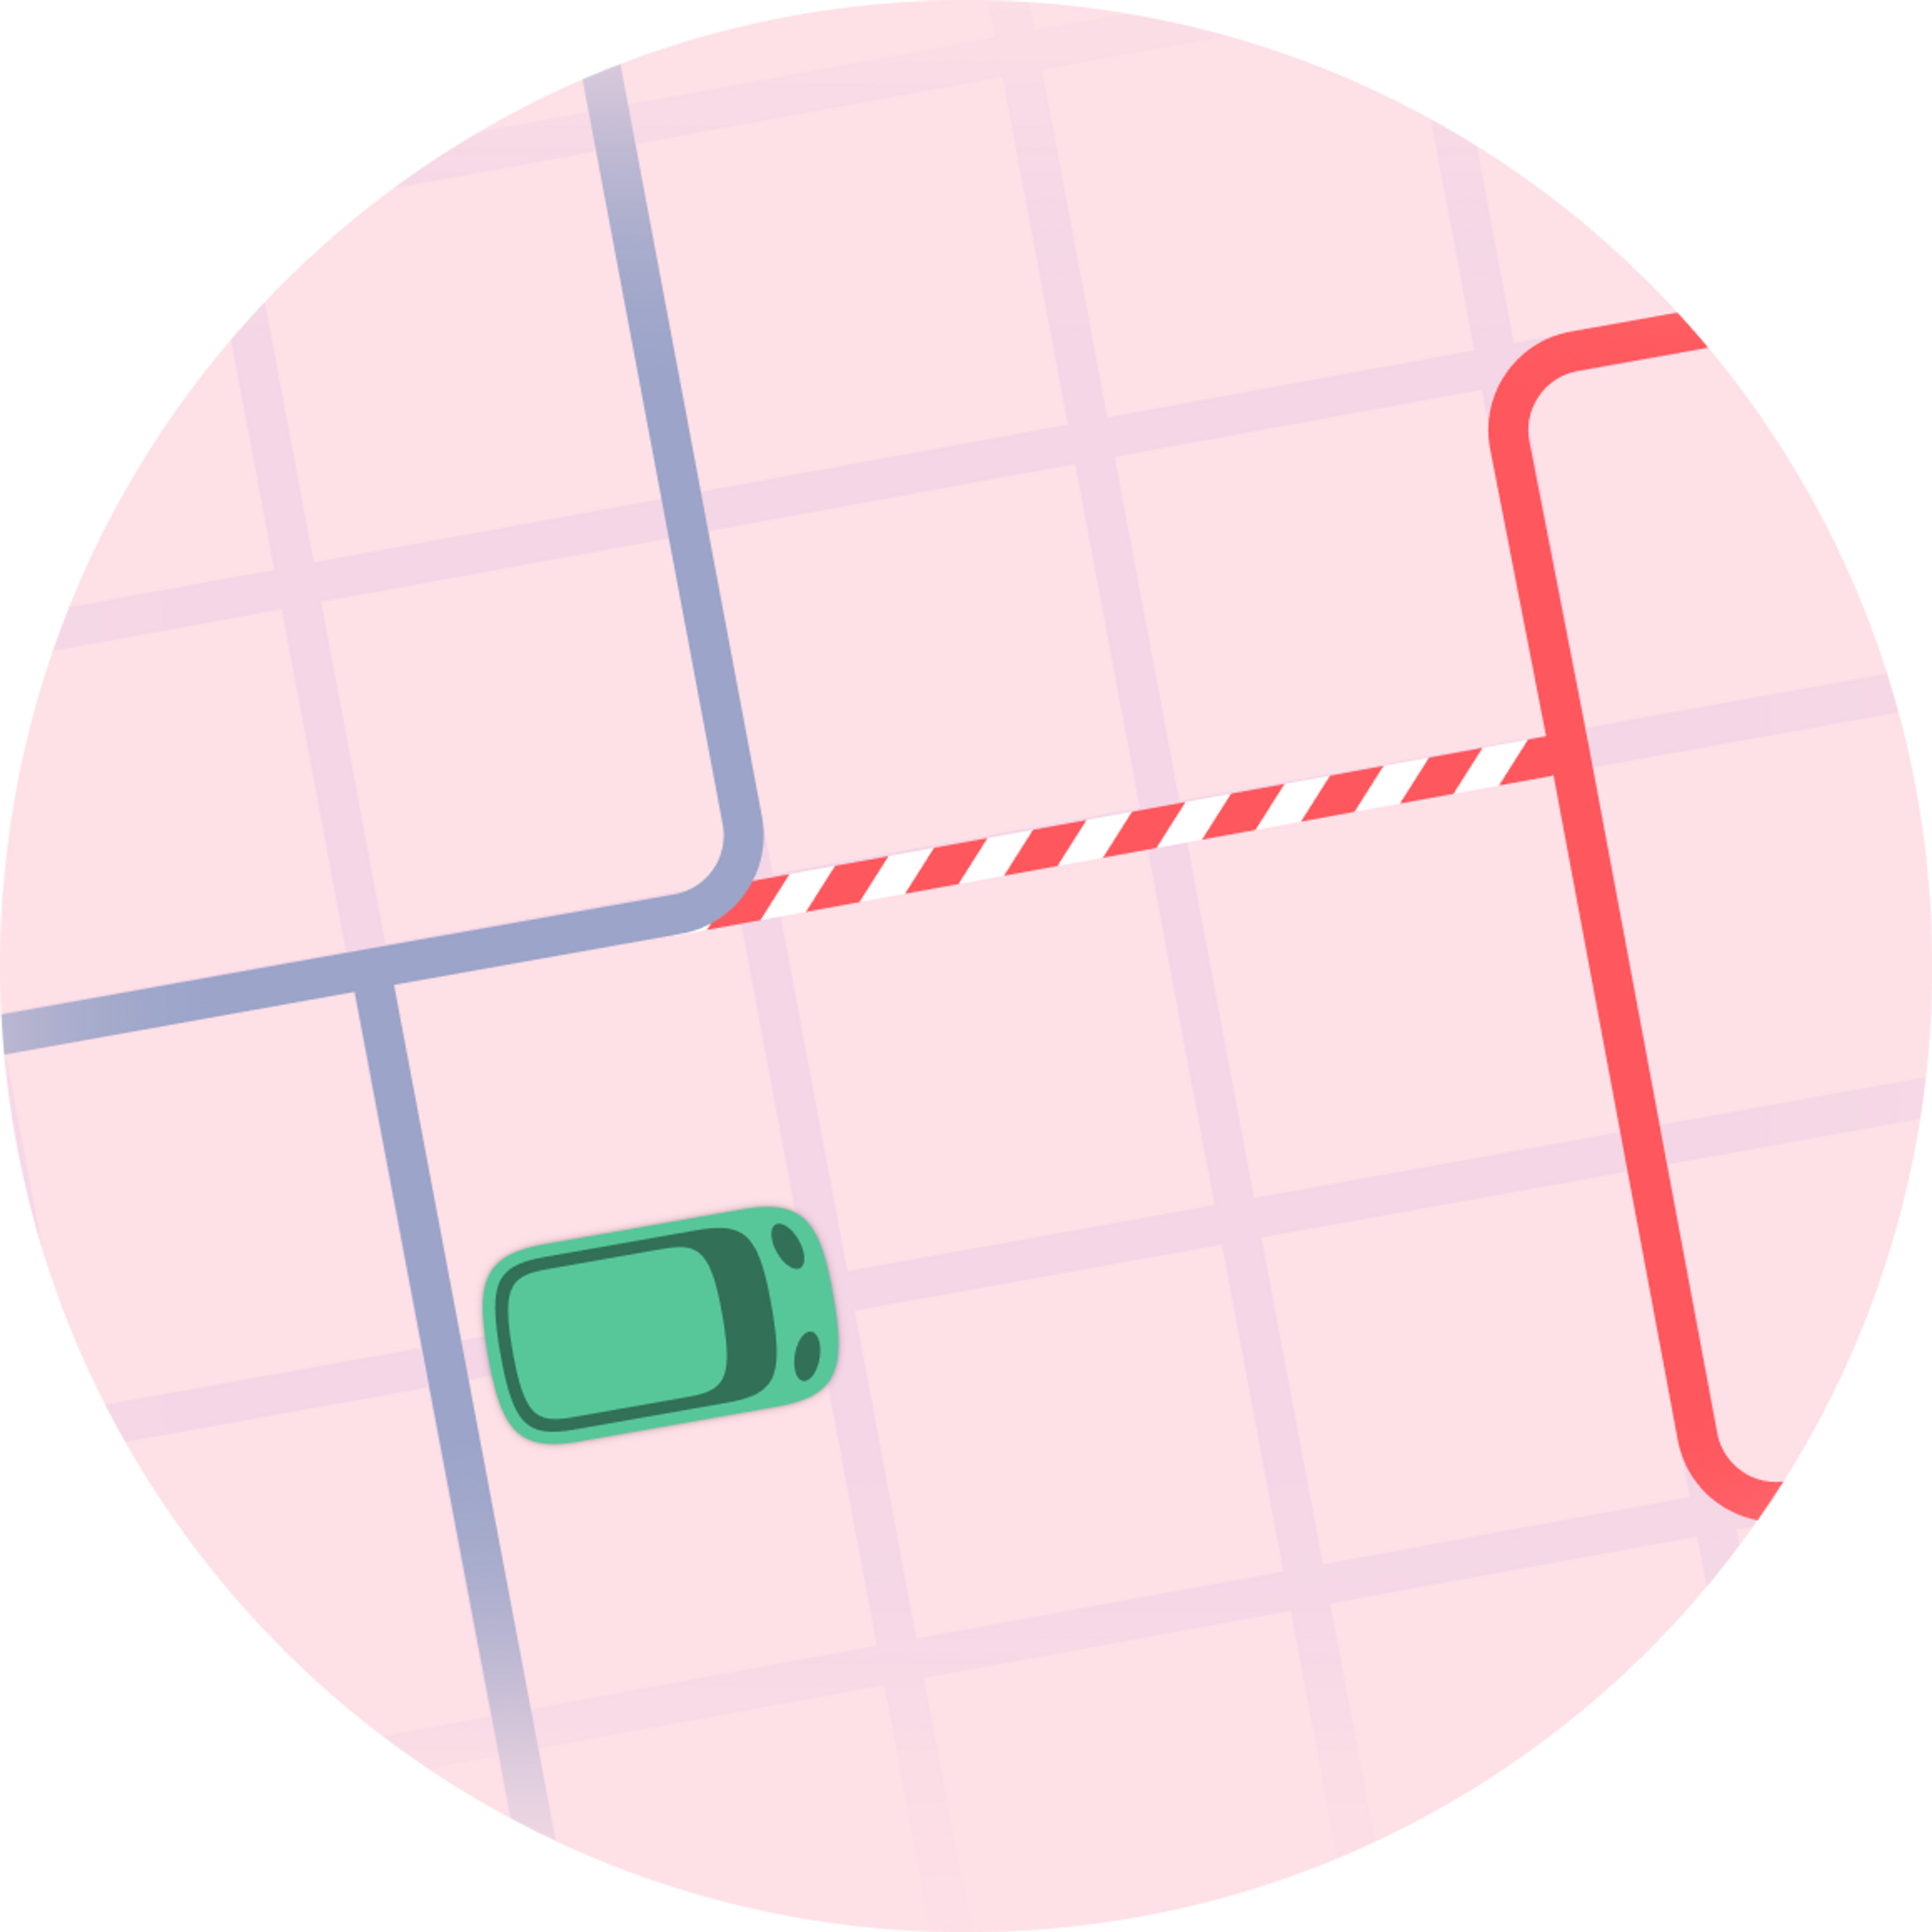 Decentralize fixed-route risk